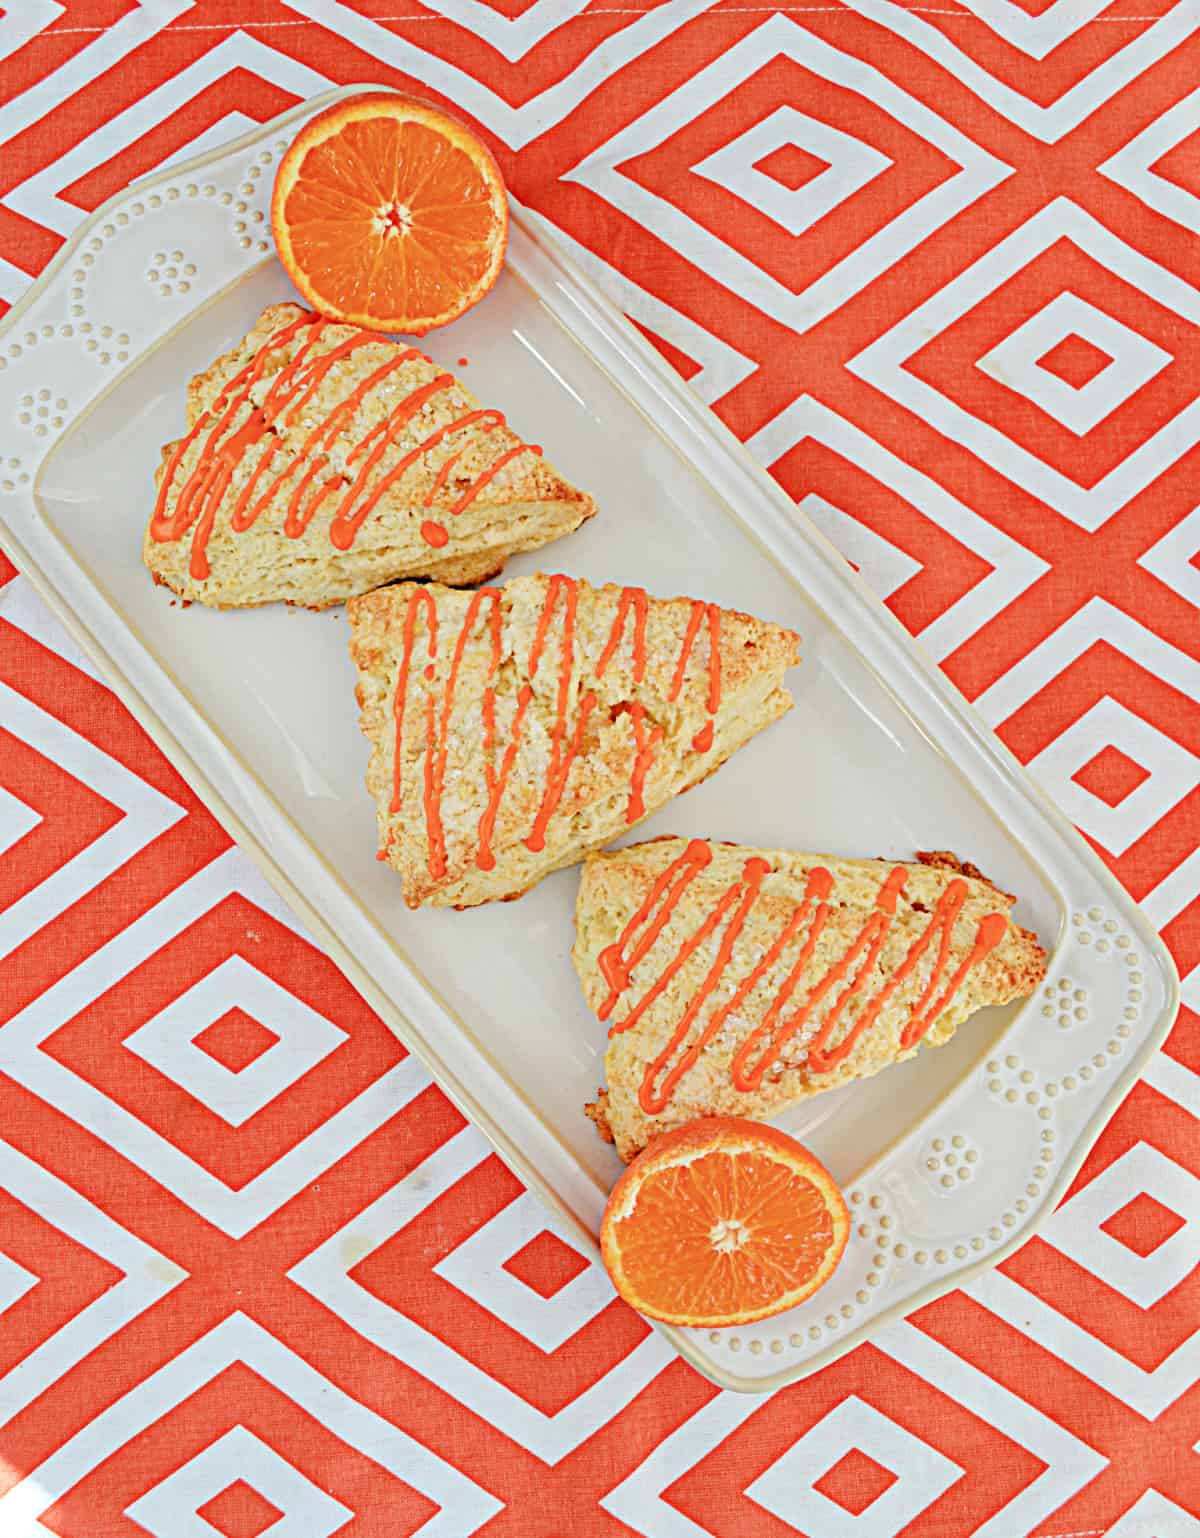 A platter with three scones drizzled with tangerine glaze and a tangerine cut in half.